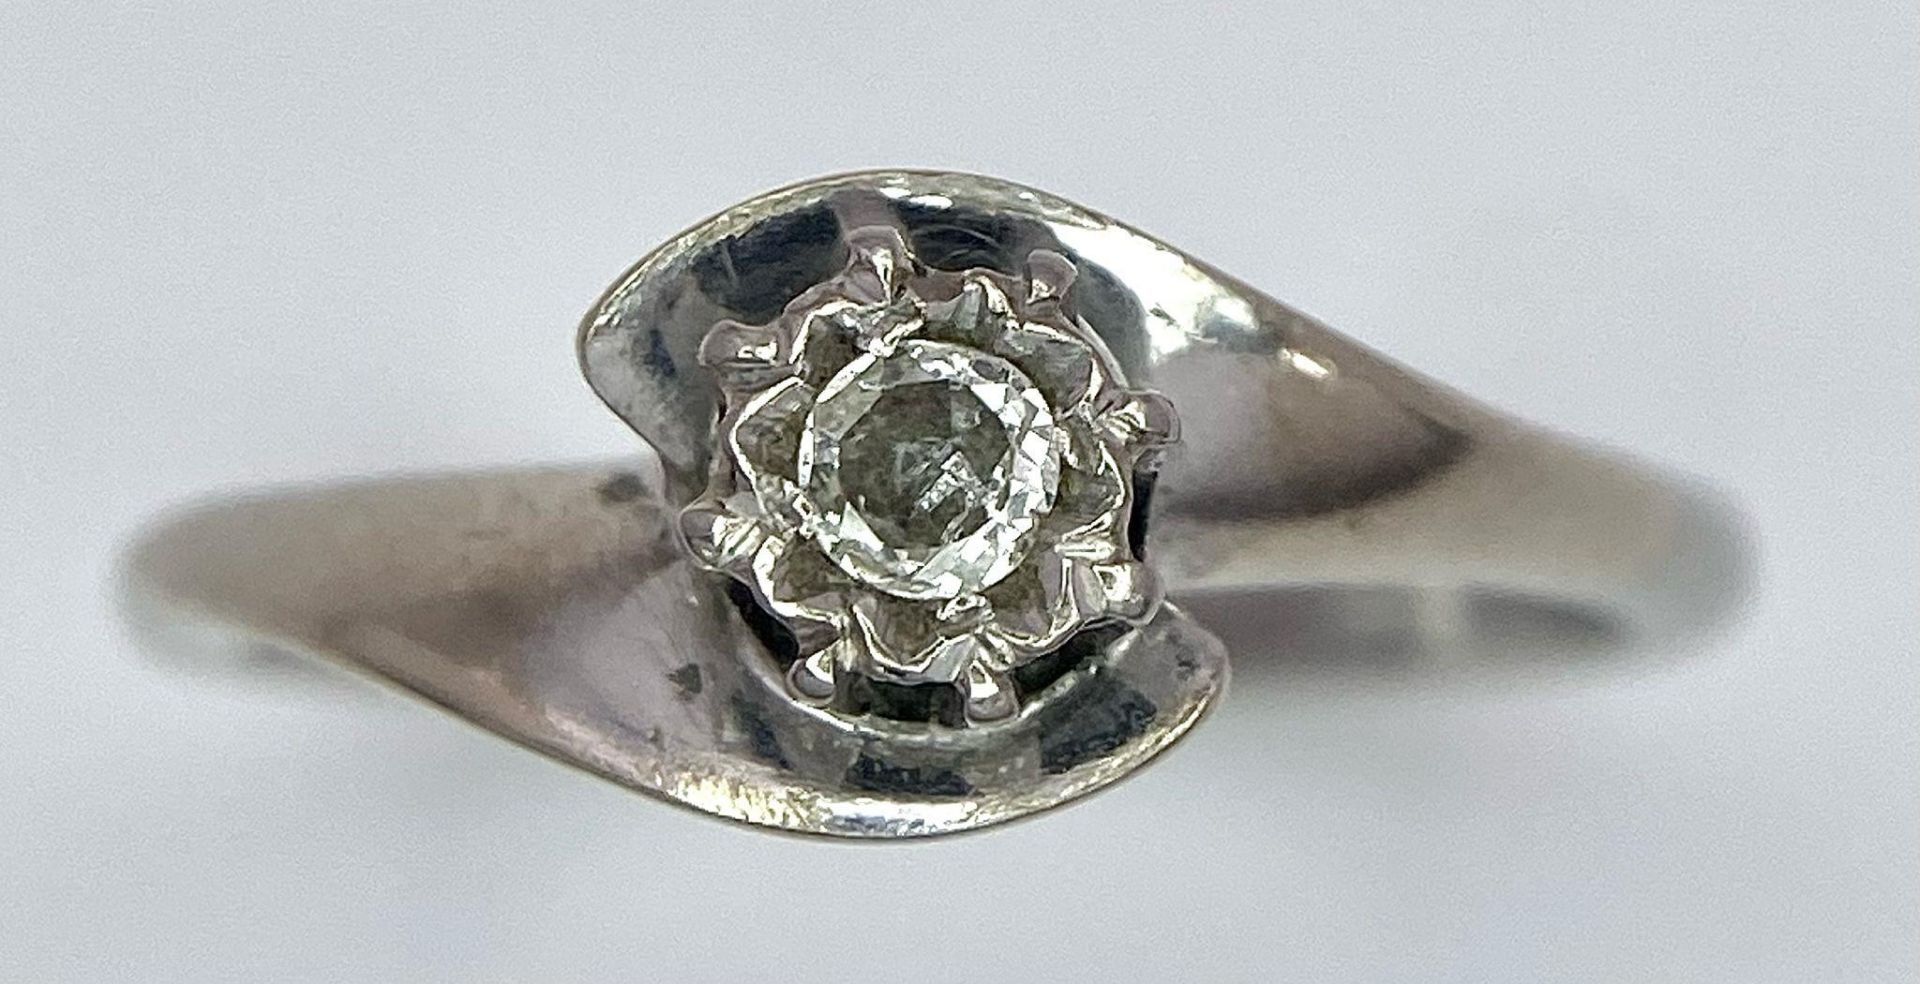 An 18K White Gold Diamond Crossover Ring. 0.10ct brilliant round cut diamond. Size N. 4g total - Image 3 of 6